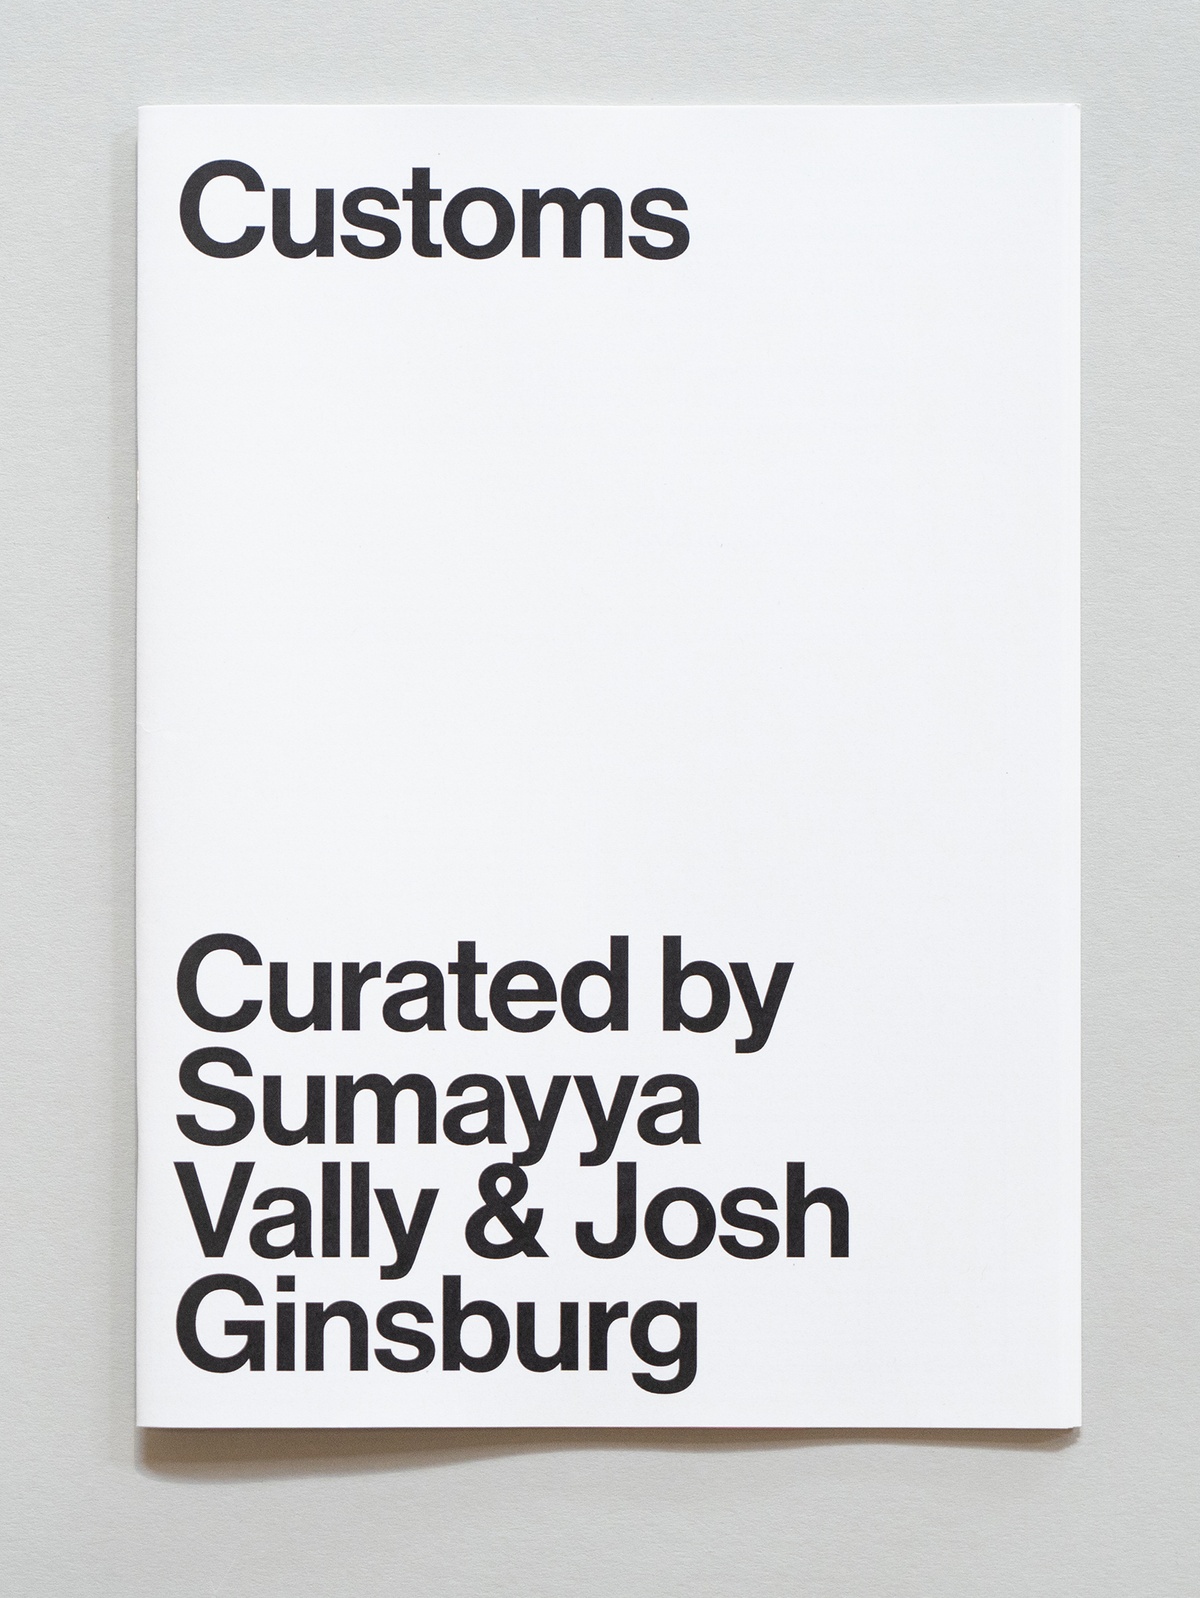 Photograph of the wayfinder publication for Customs, curated by Sumayya Vally and Josh Ginsburg in A4 Arts Foundation's Gallery.
